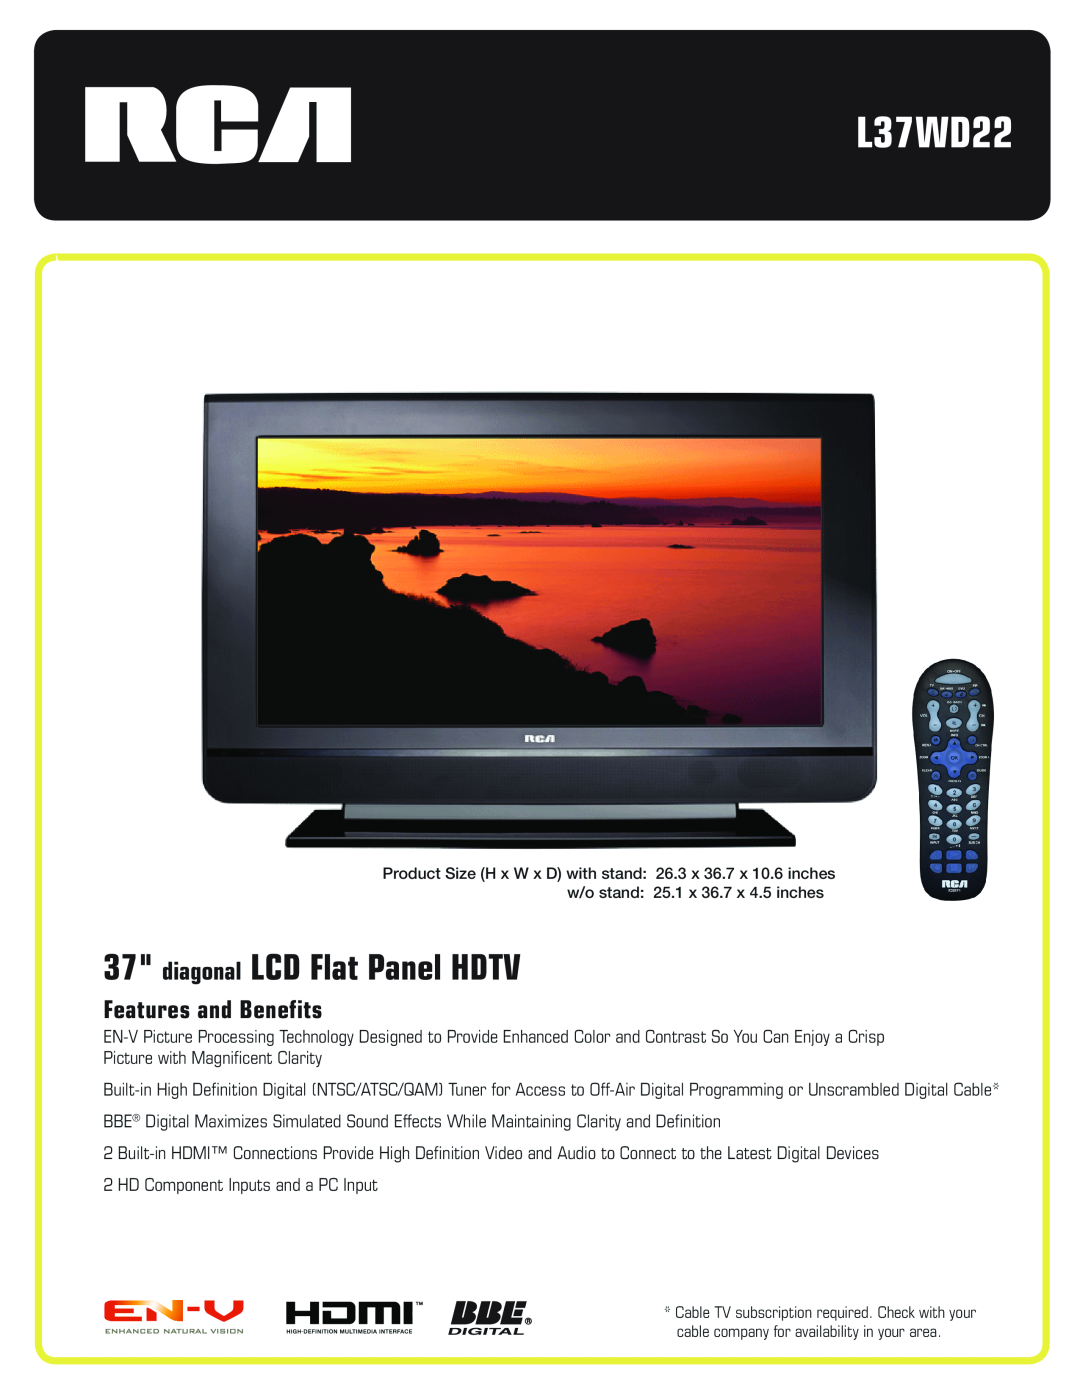 RCA L37WD22 manual diagonal LCD Flat Panel HDTV, Features and Benefits 